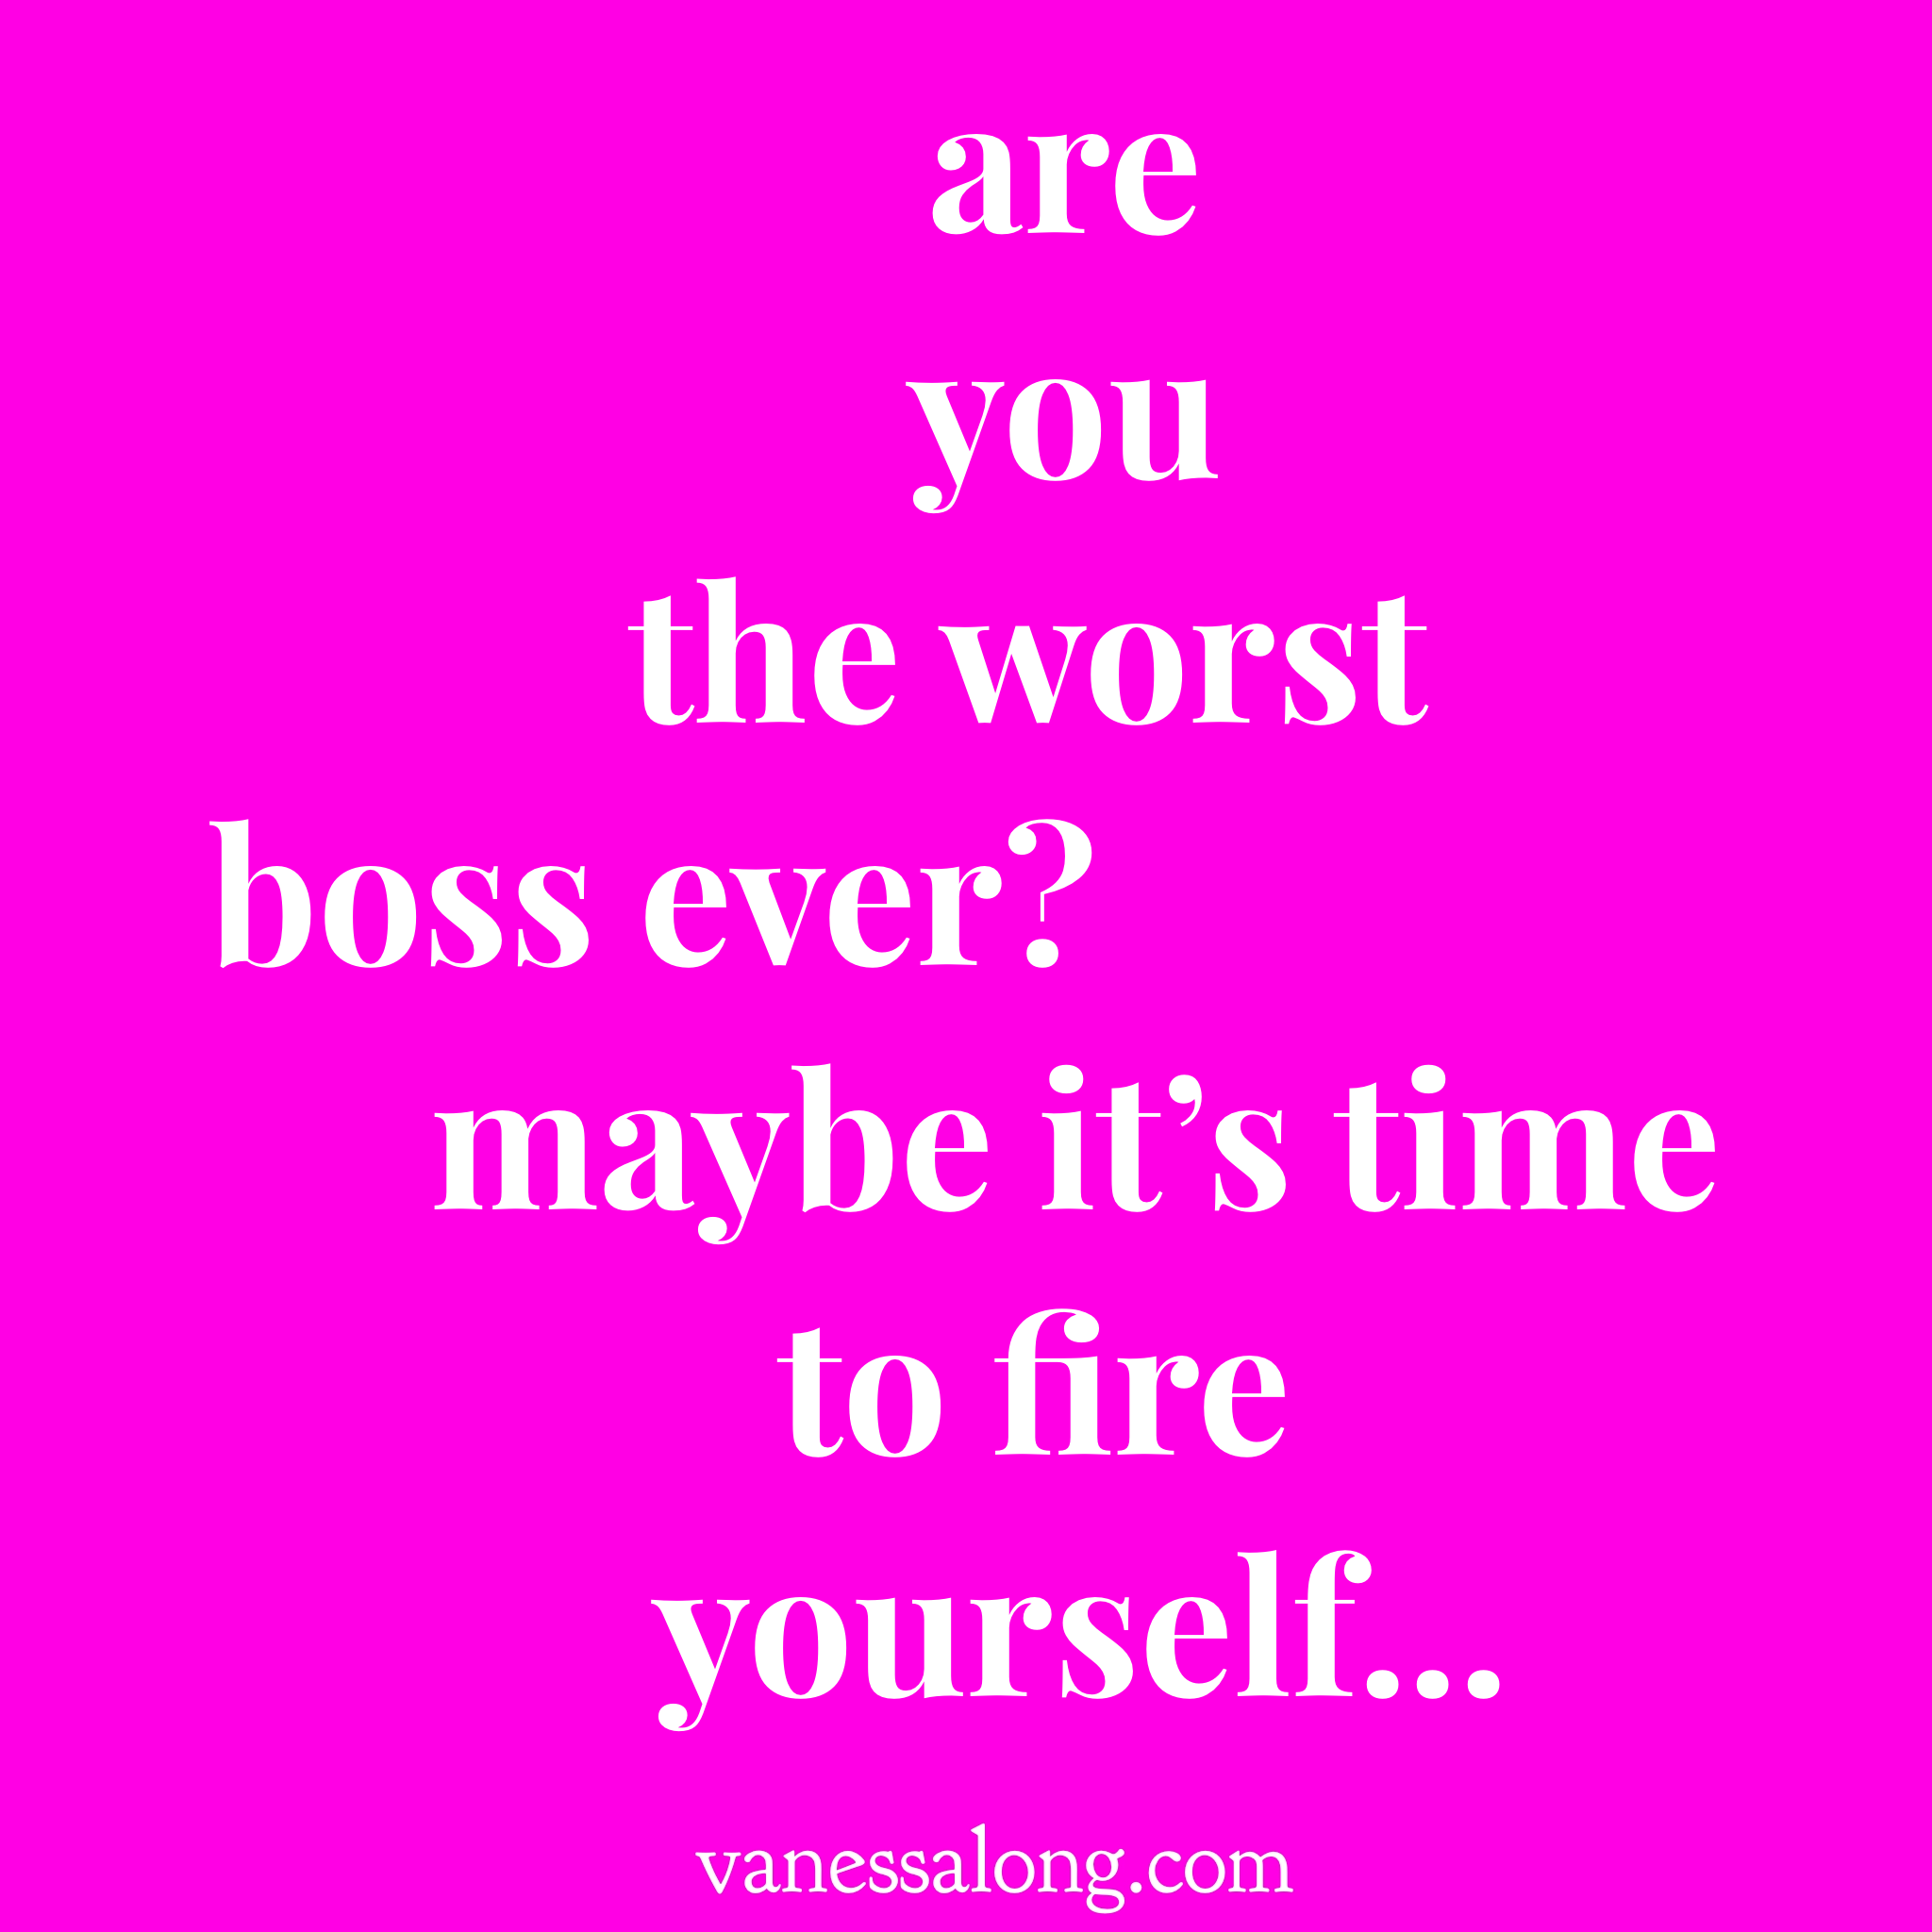 are you the worst boss ever? maybe it's time to fire yourself